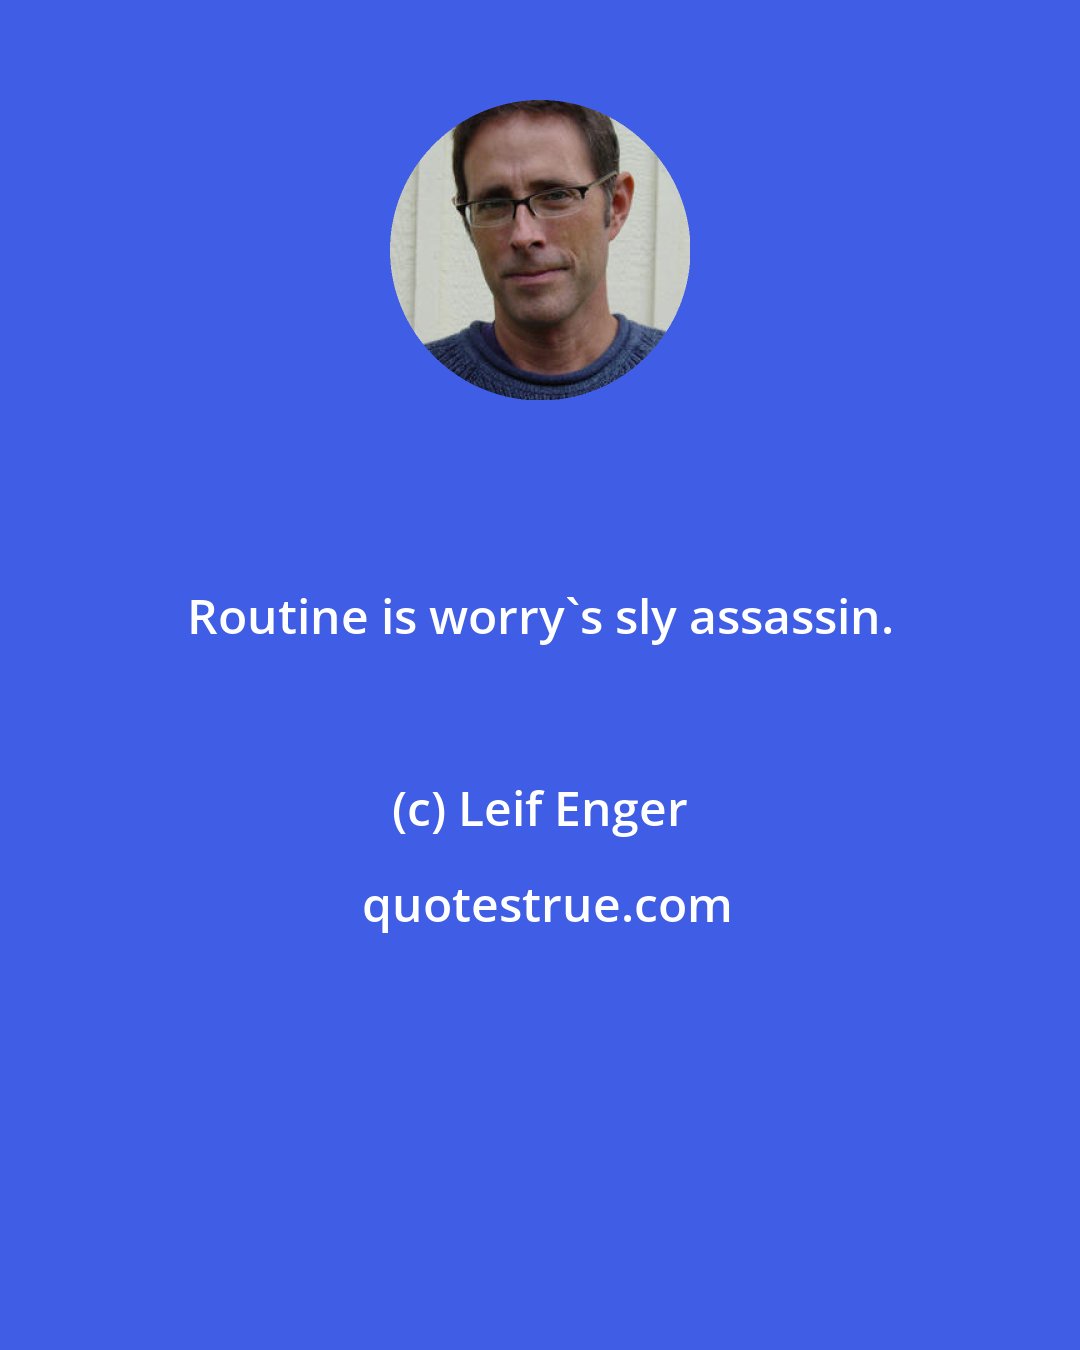 Leif Enger: Routine is worry's sly assassin.